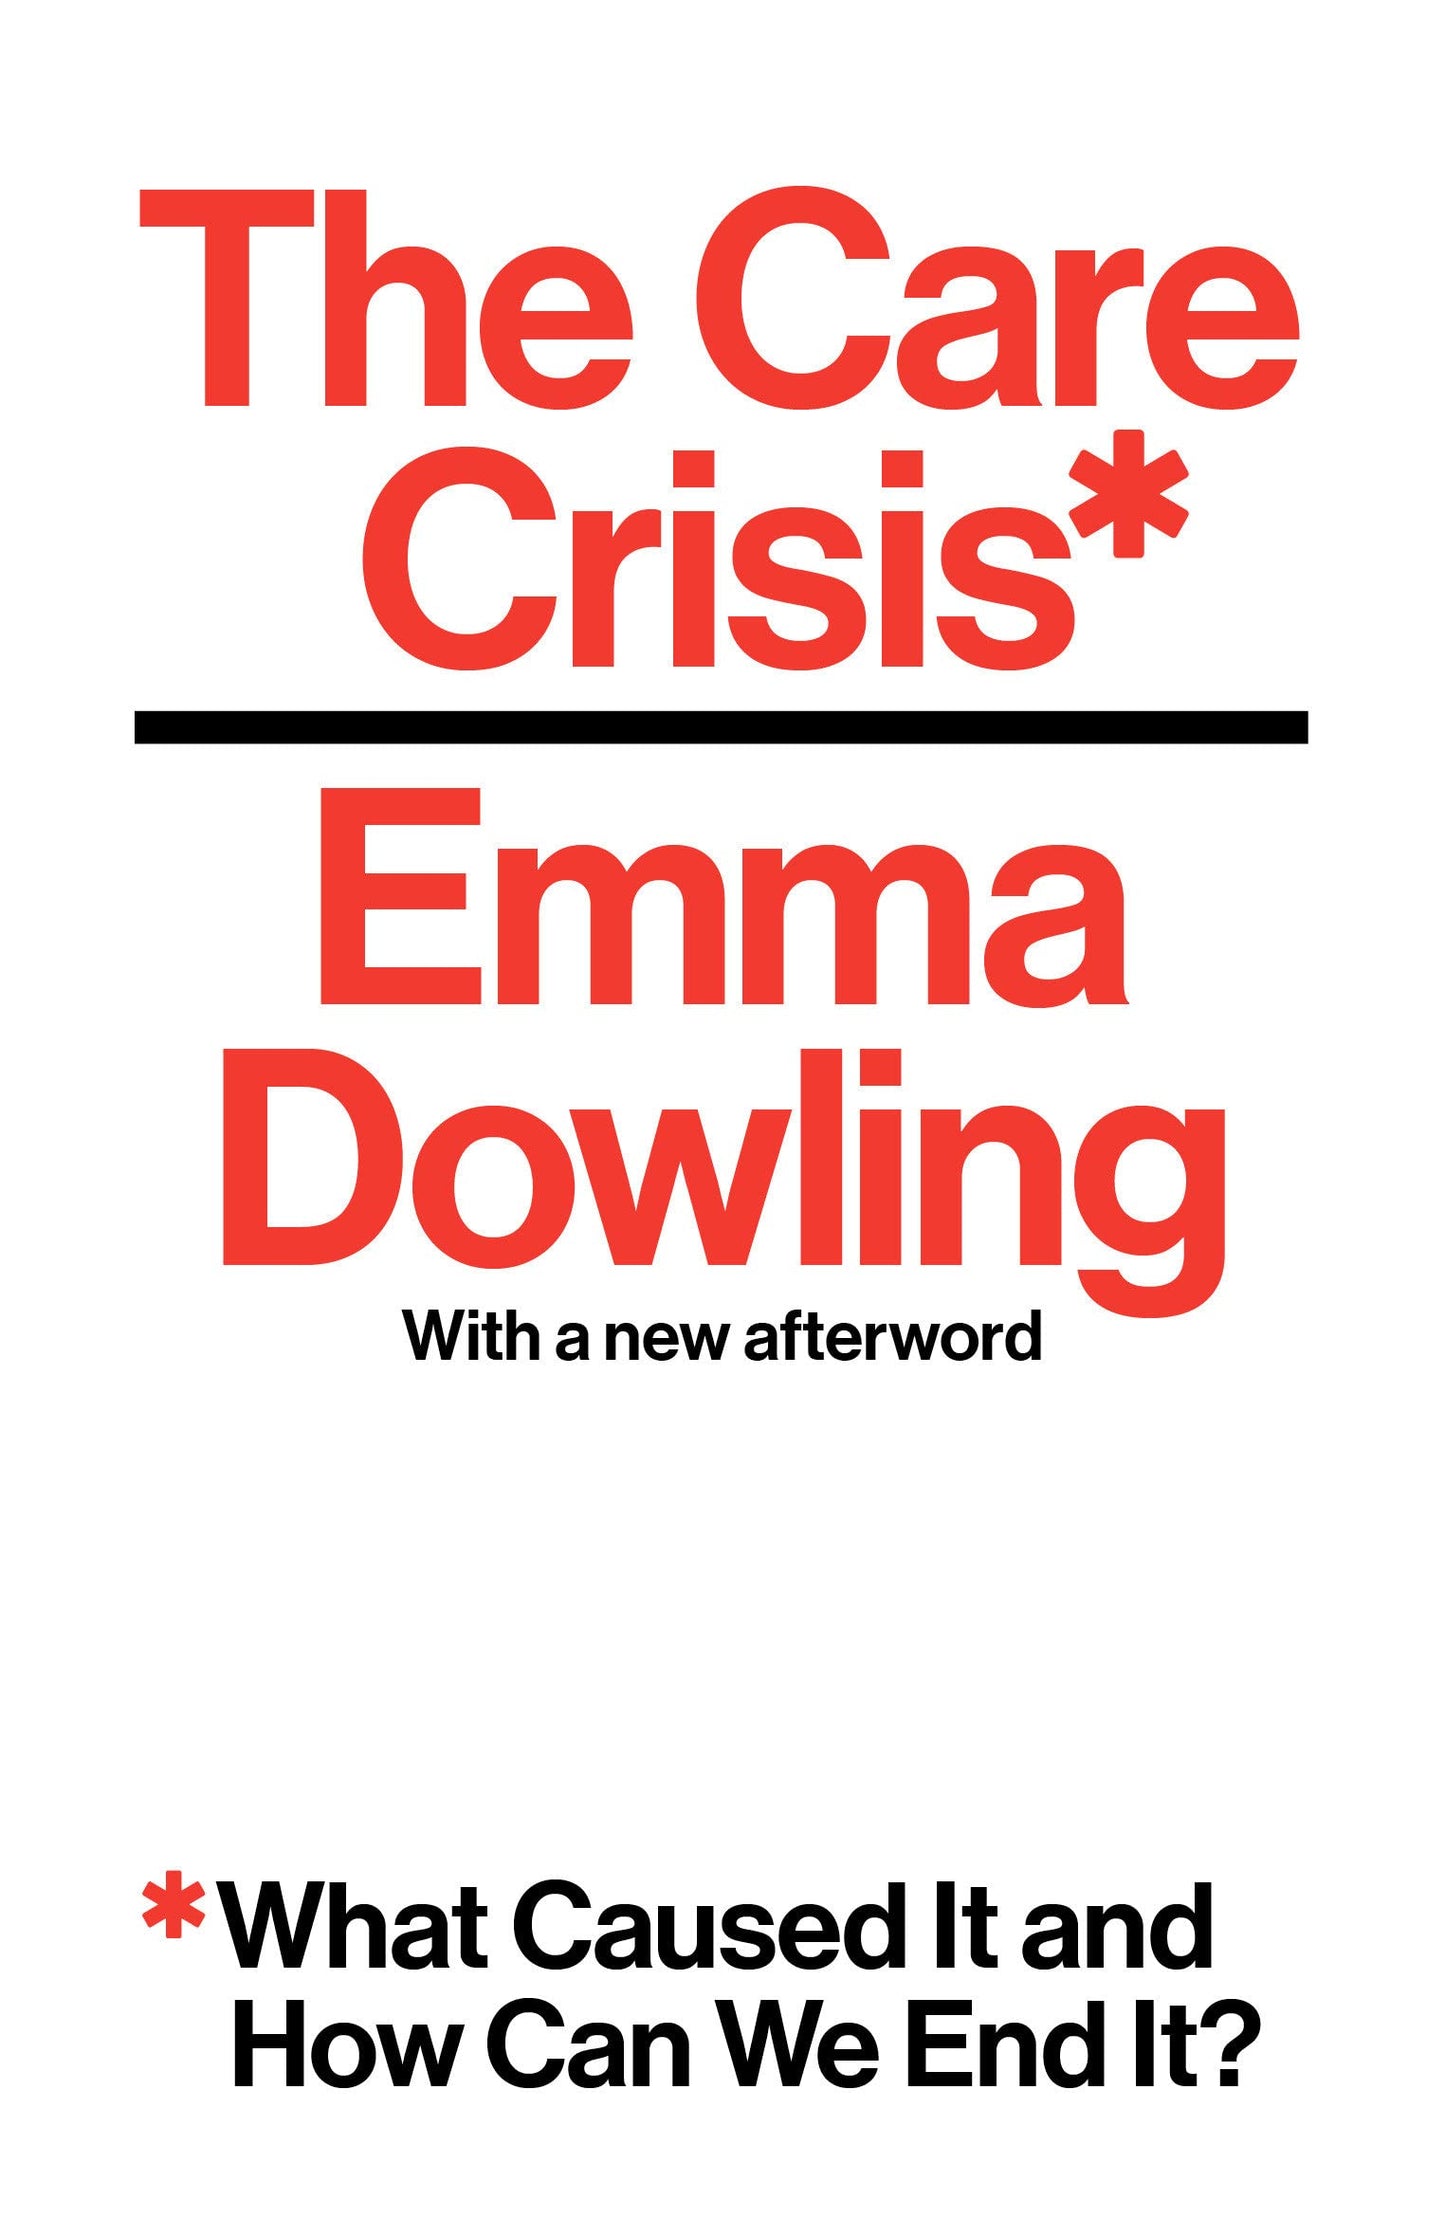 The Care Crisis, by Emma Dowling